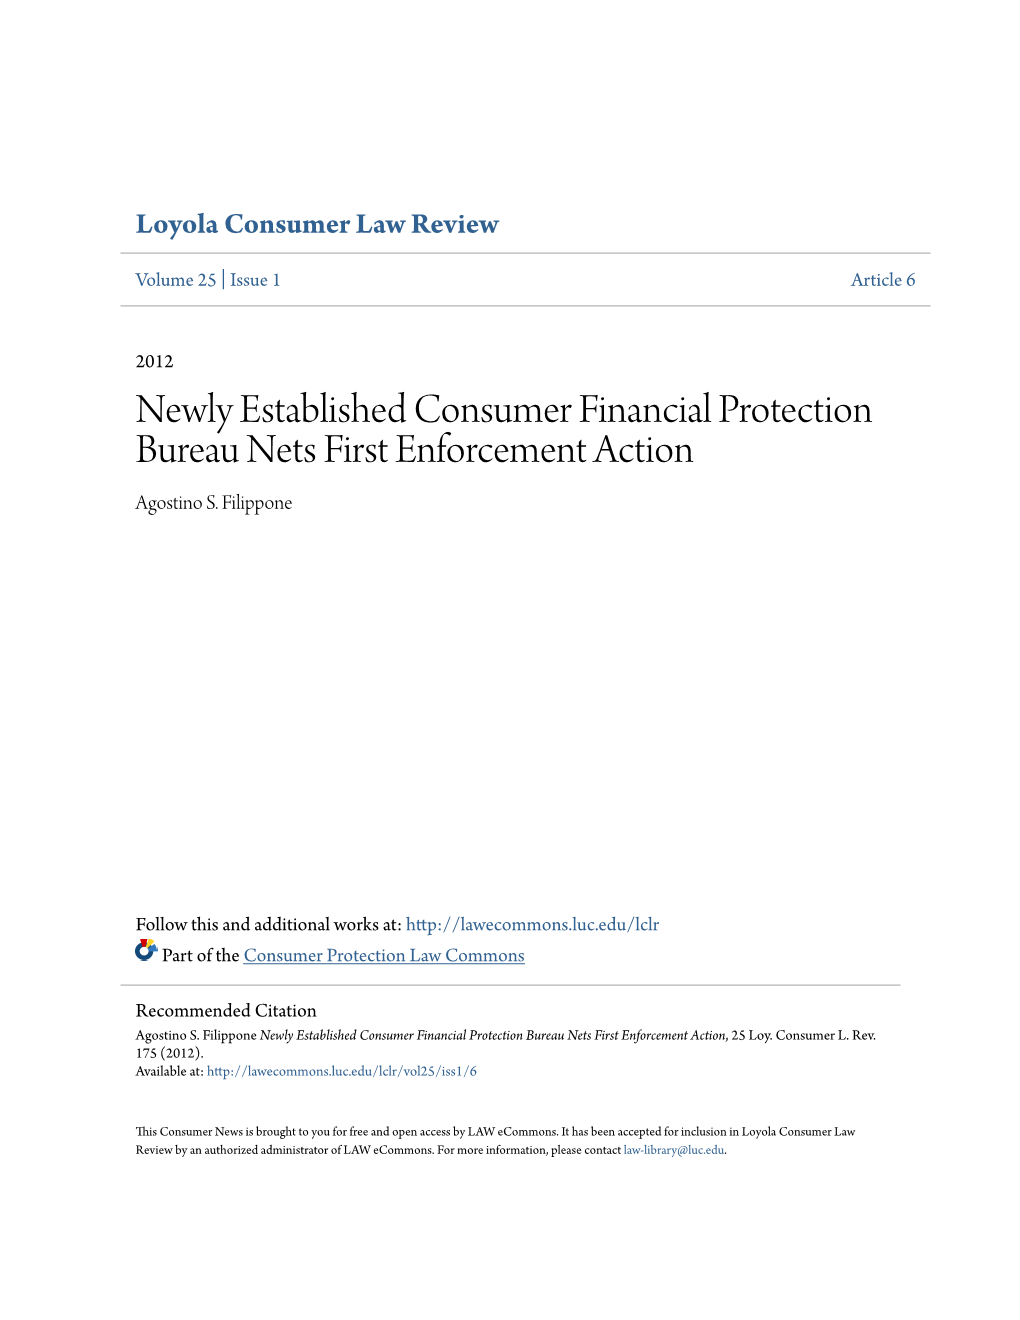 Newly Established Consumer Financial Protection Bureau Nets First Enforcement Action Agostino S